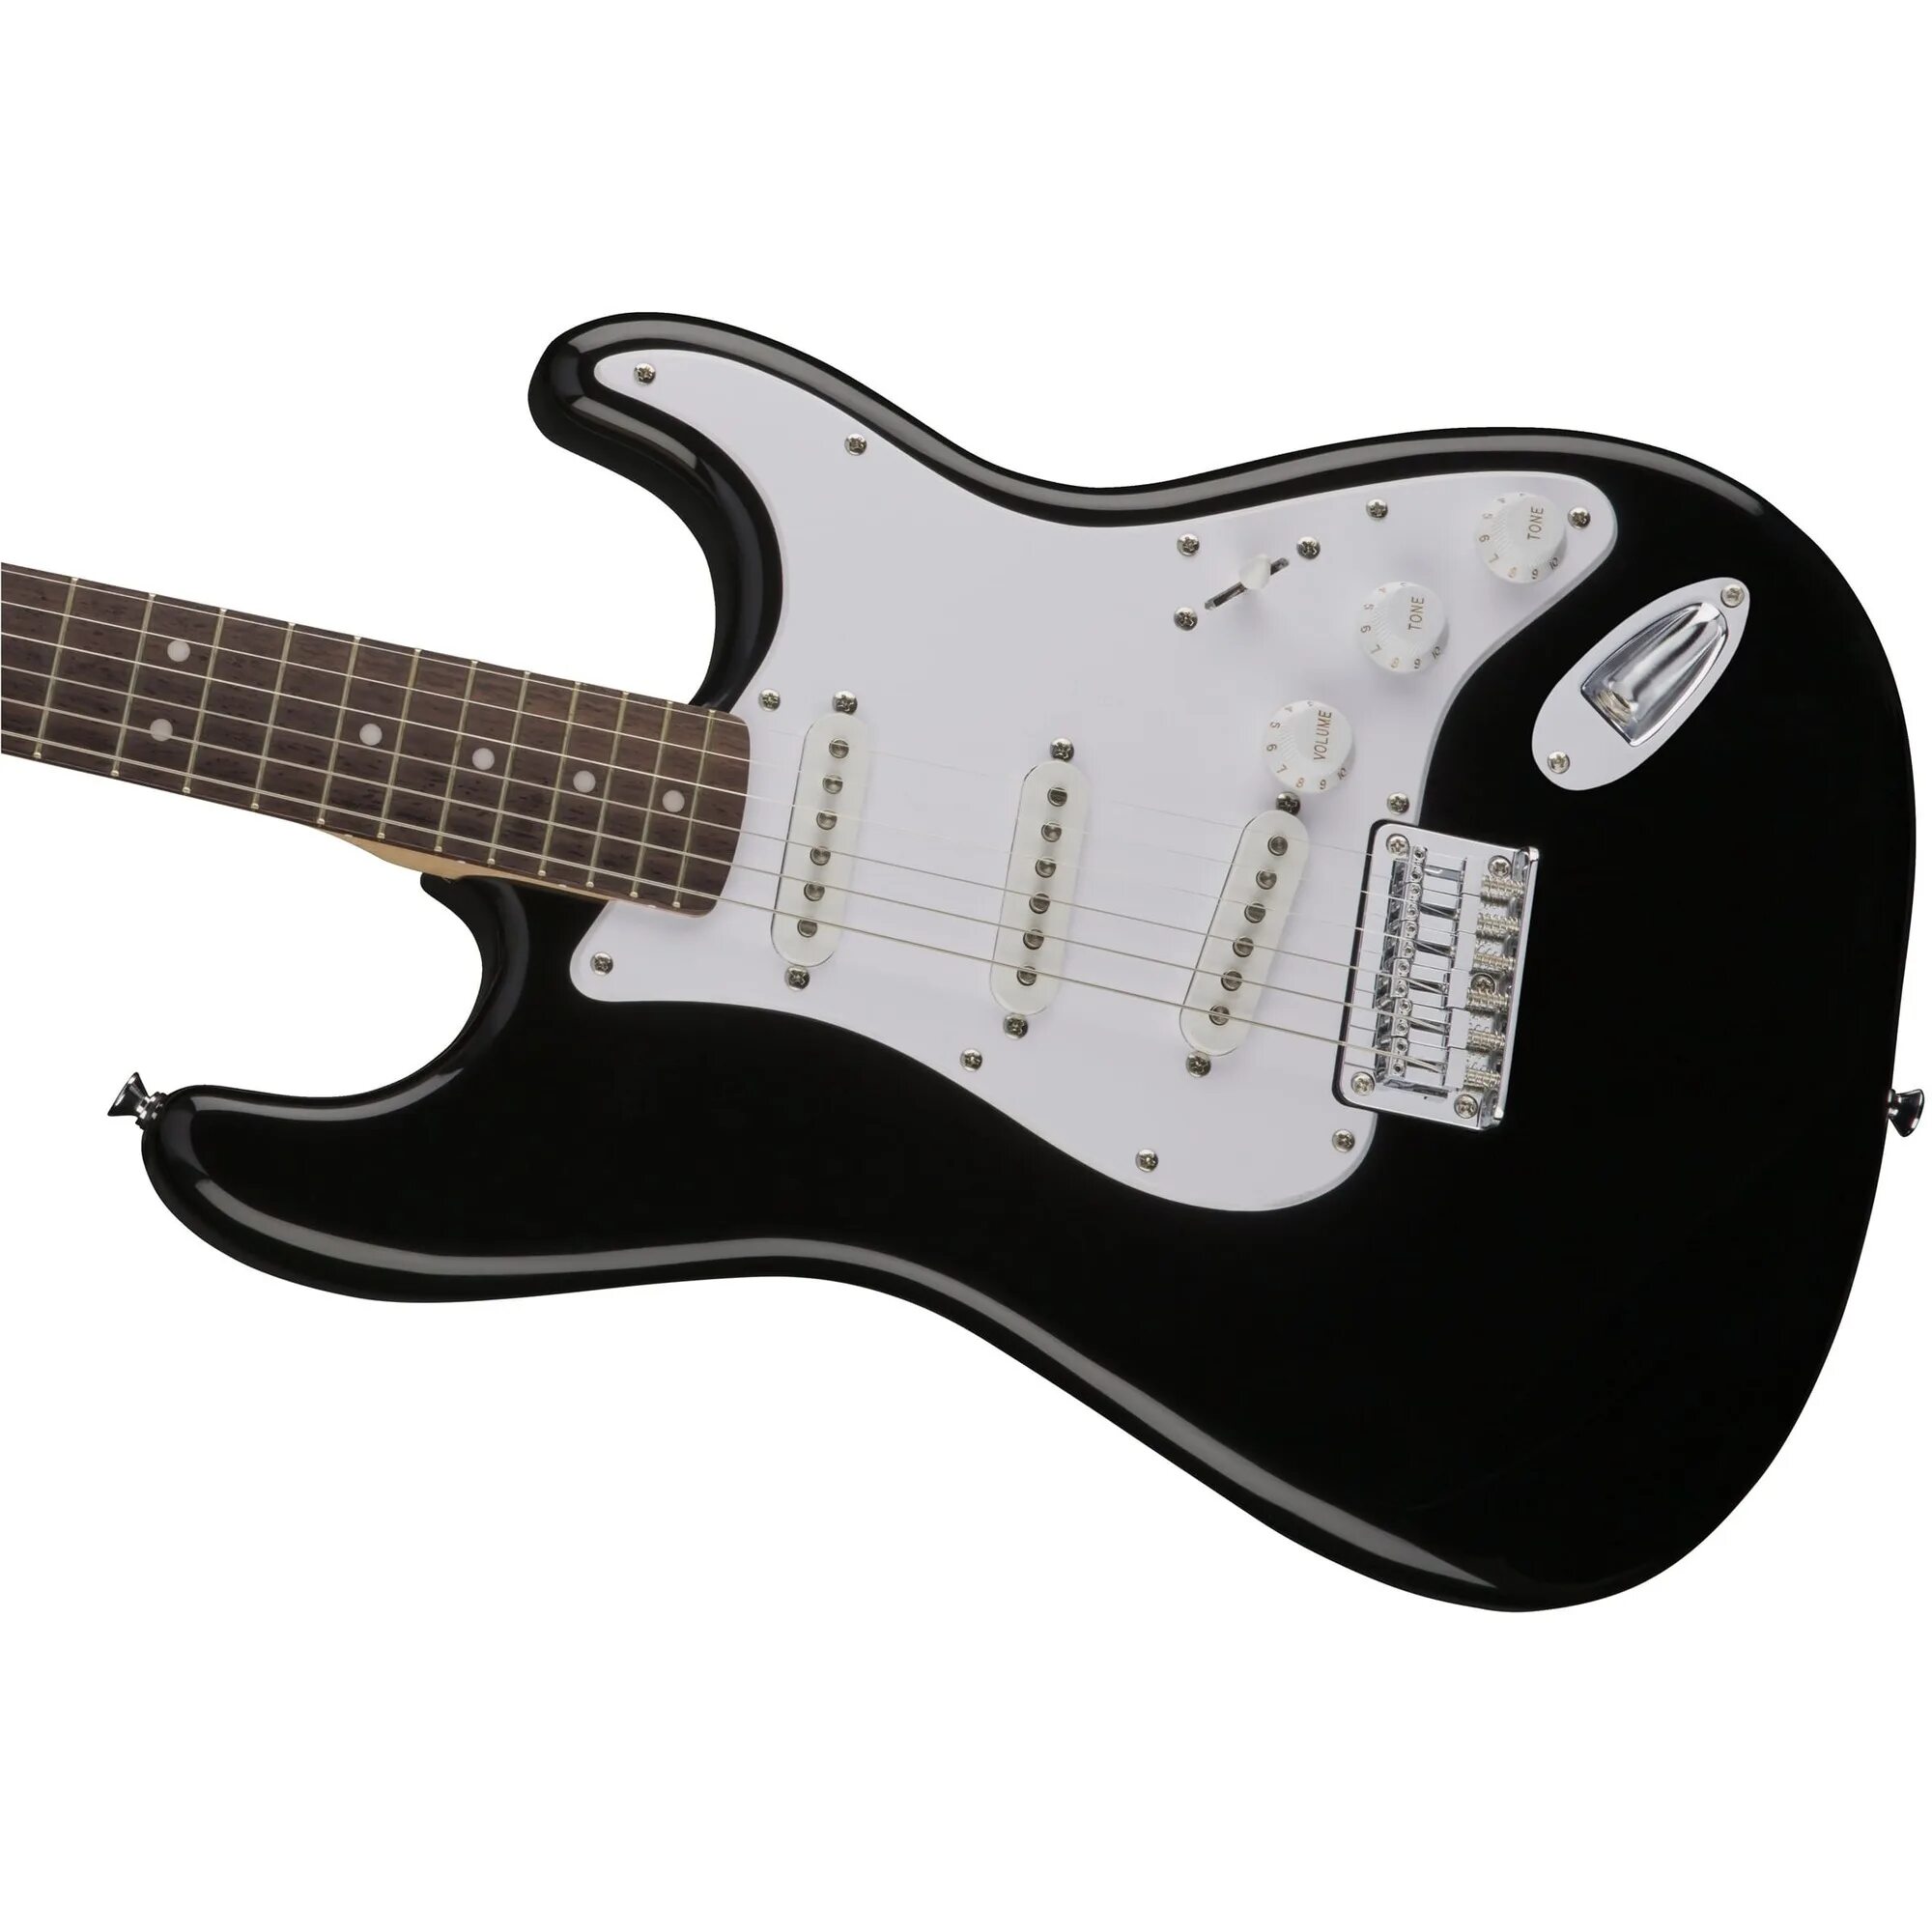 Squier mm stratocaster. Электрогитара Fender Squier Stratocaster. Электрогитара Fender Squier Bullet. Электрогитара Fender Squier Bullet Stratocaster. Гитара Fender Squier Bullet Strat.